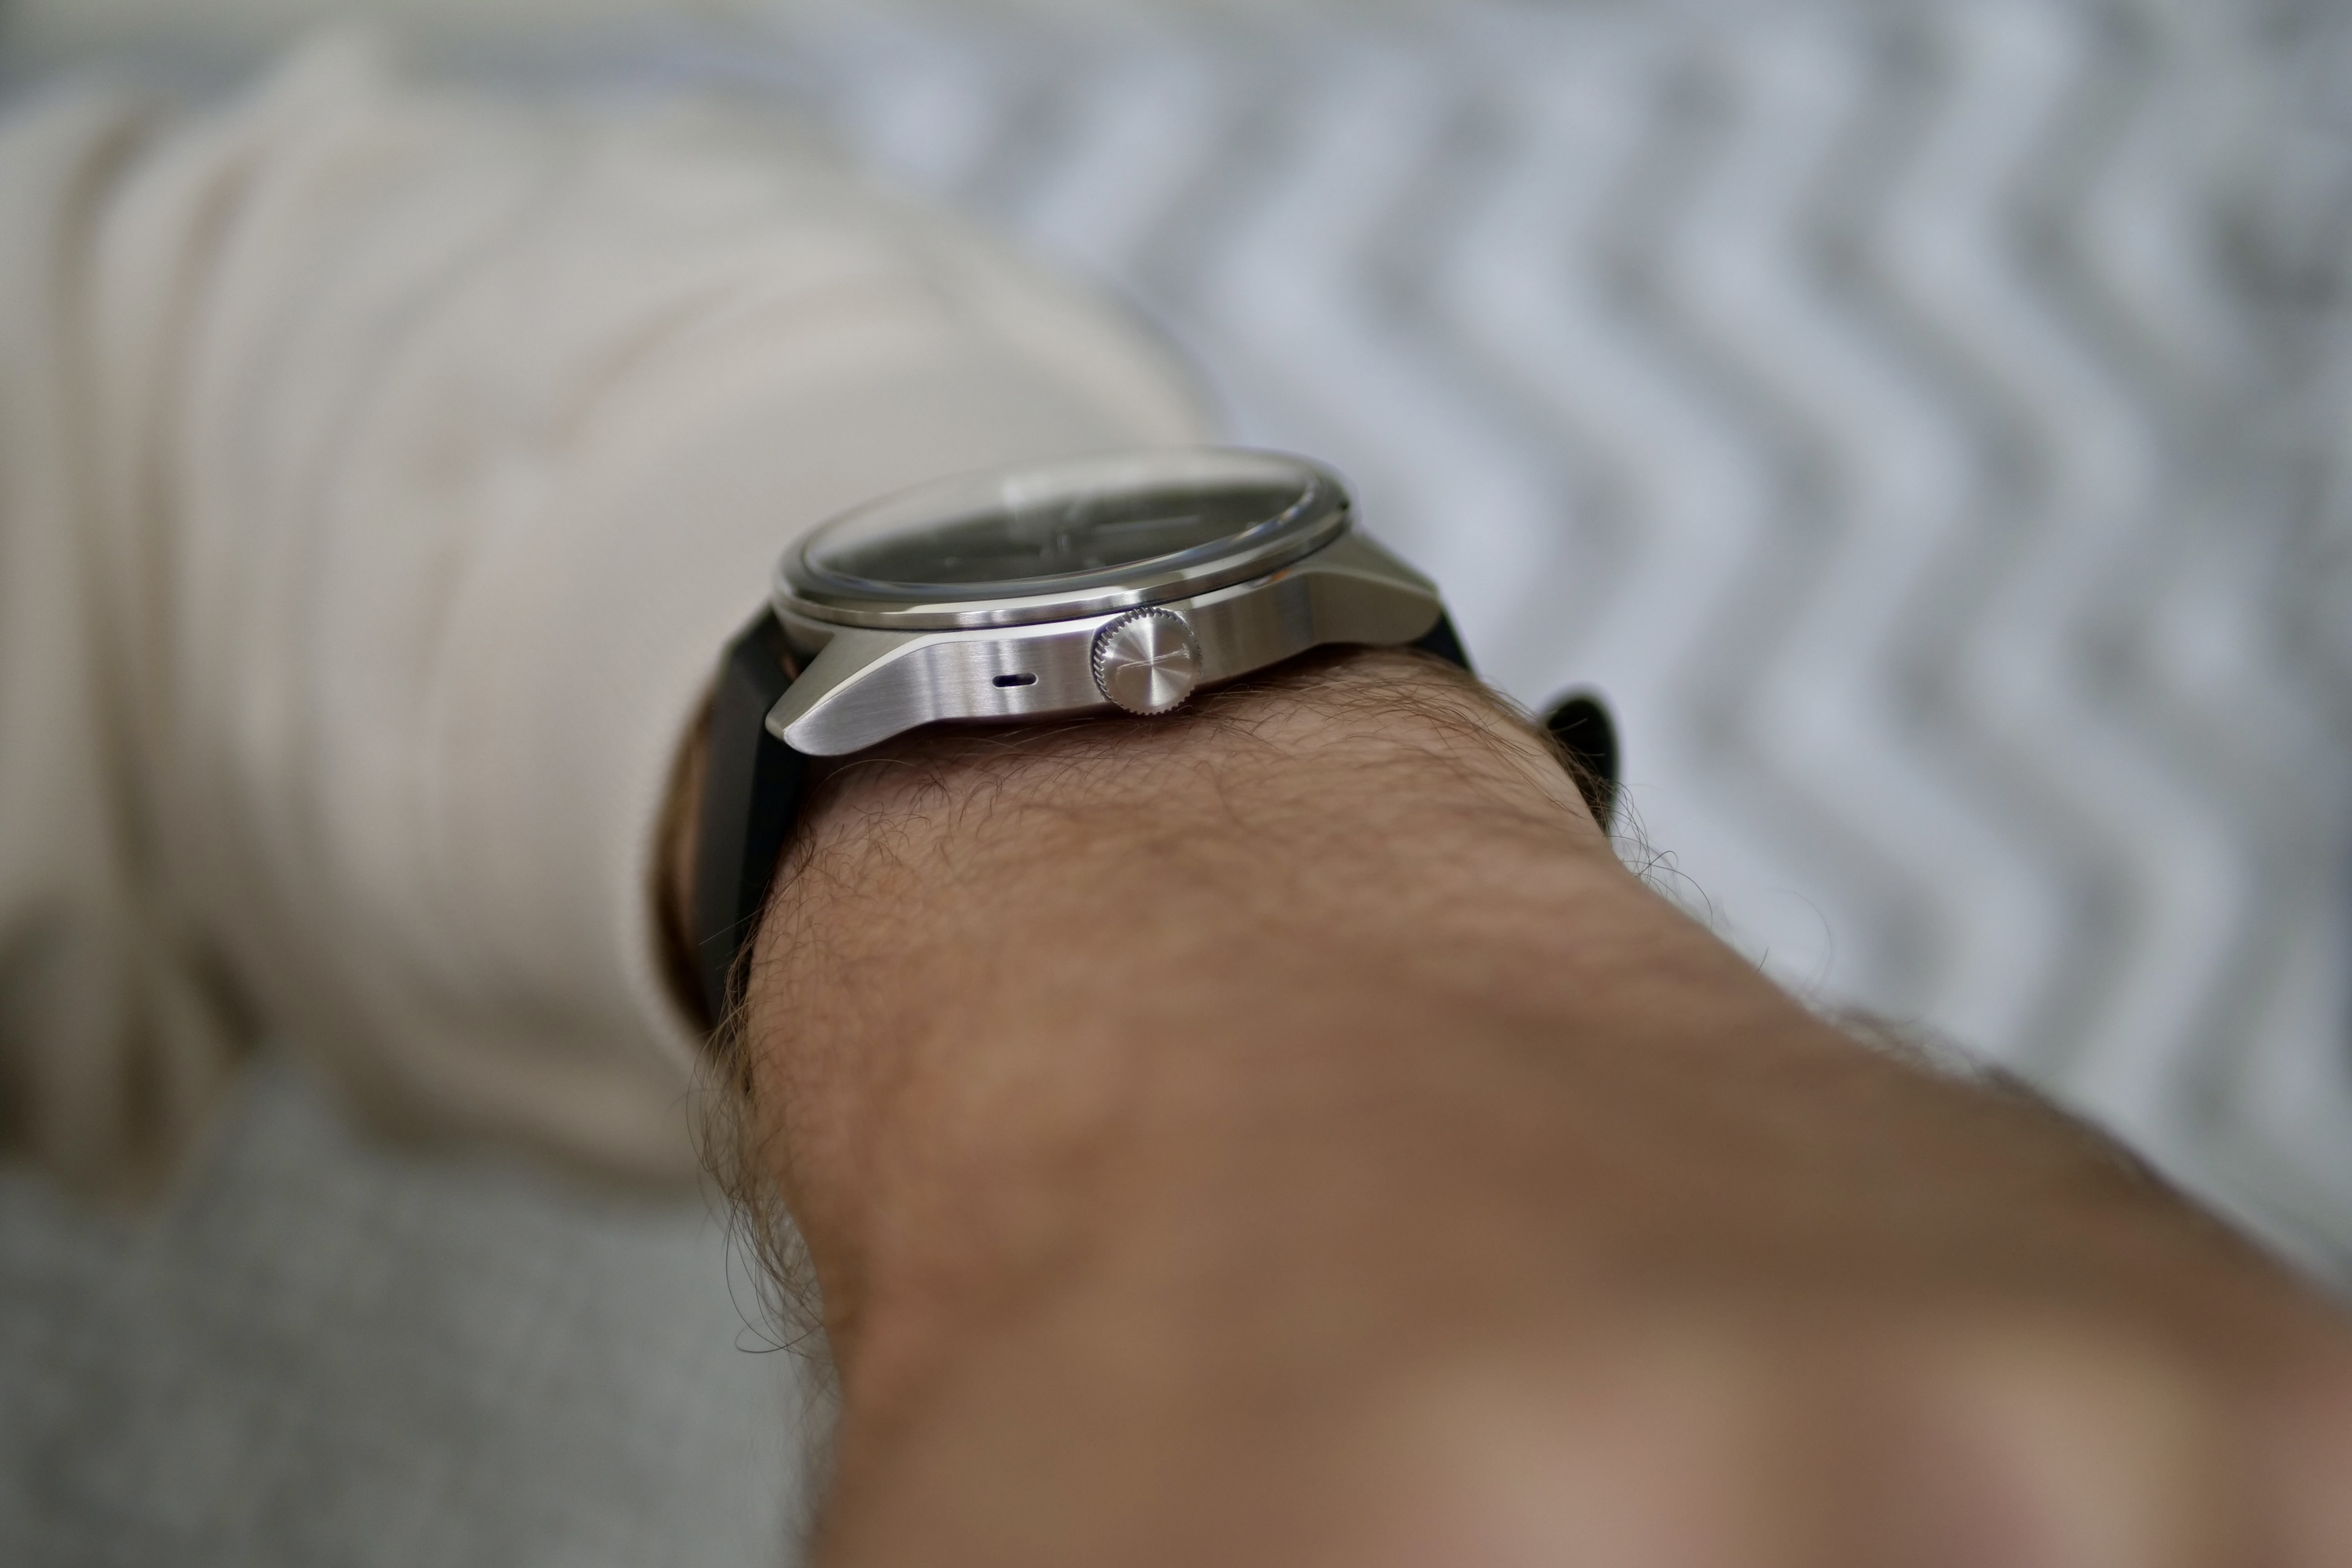 Withings ScanWatch 2 hands-on review: getting hot in here?